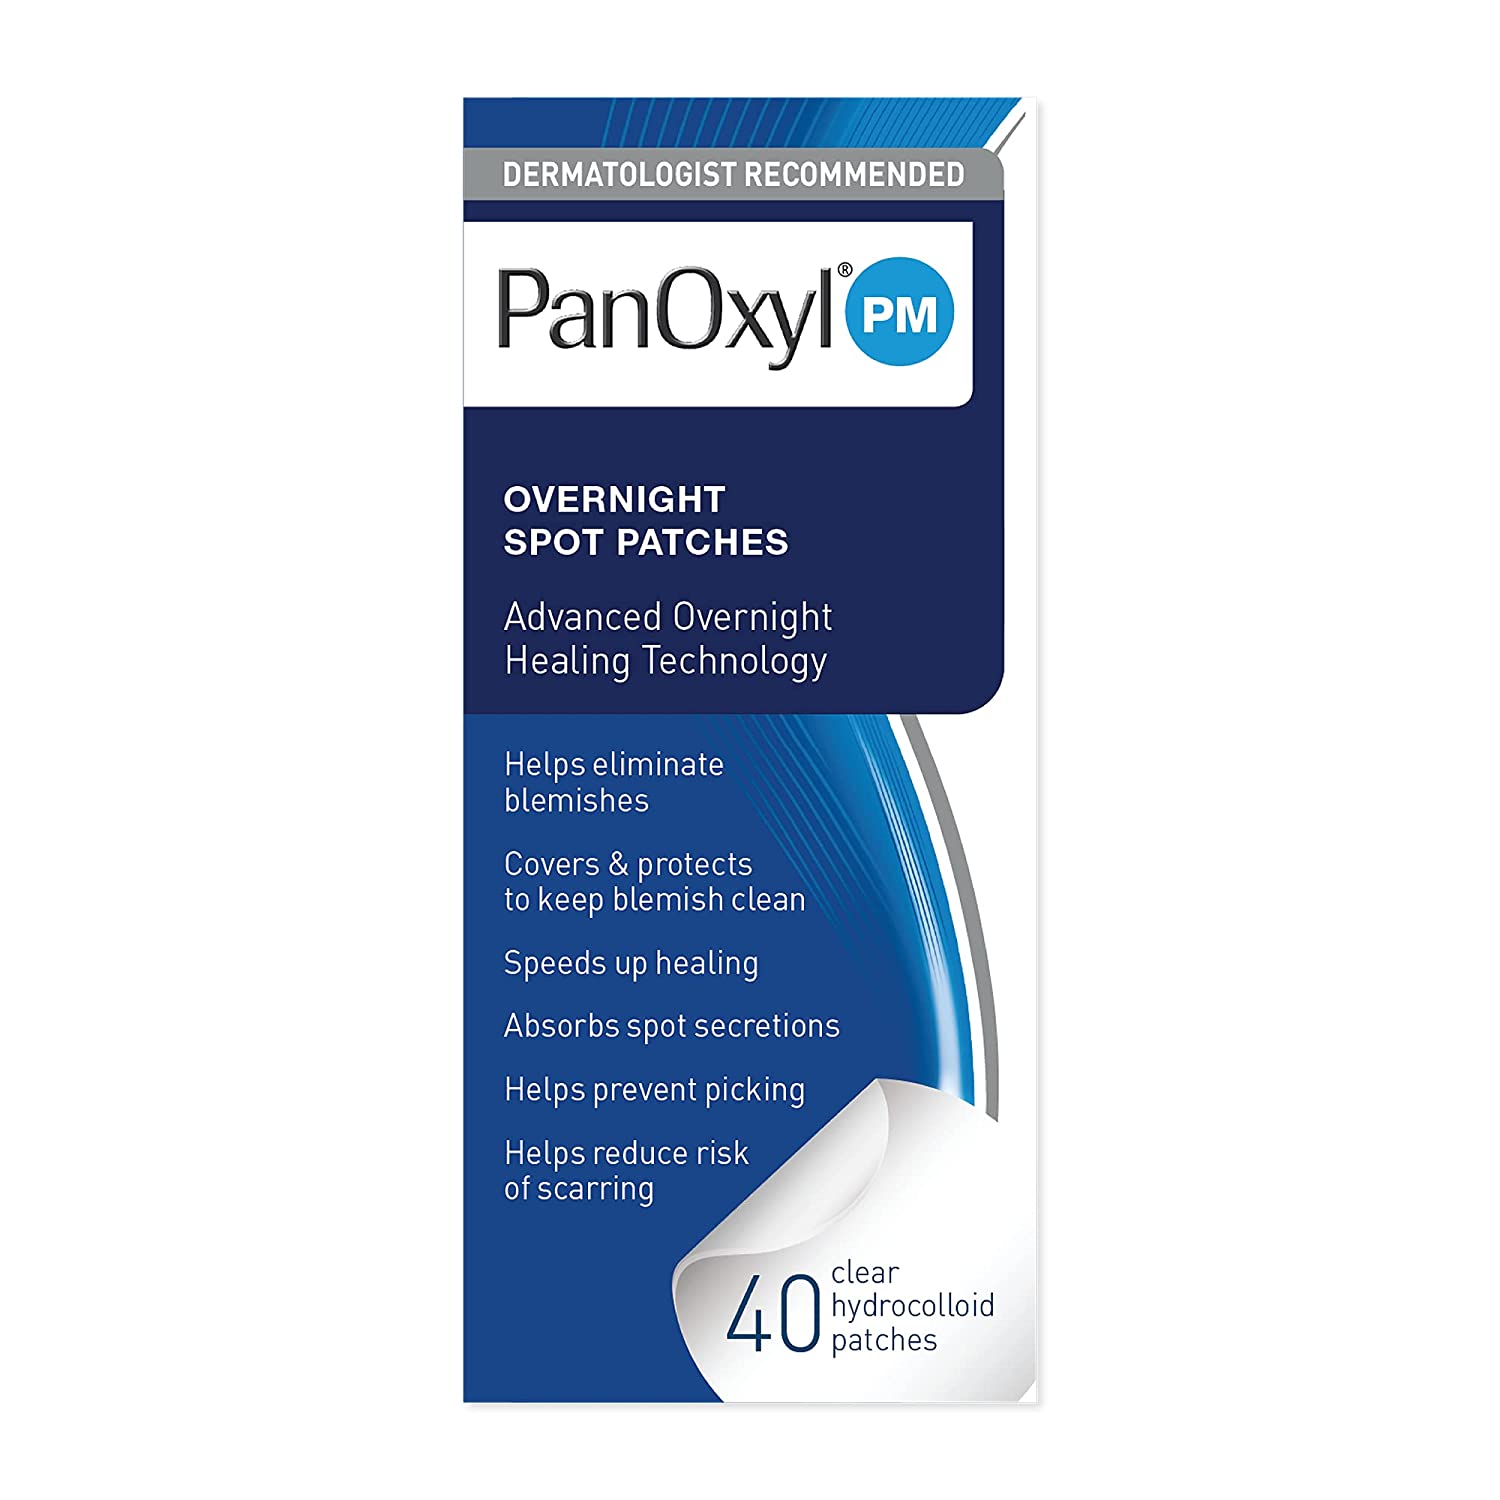  PanOxyl | PM Overnight Spot Patches 